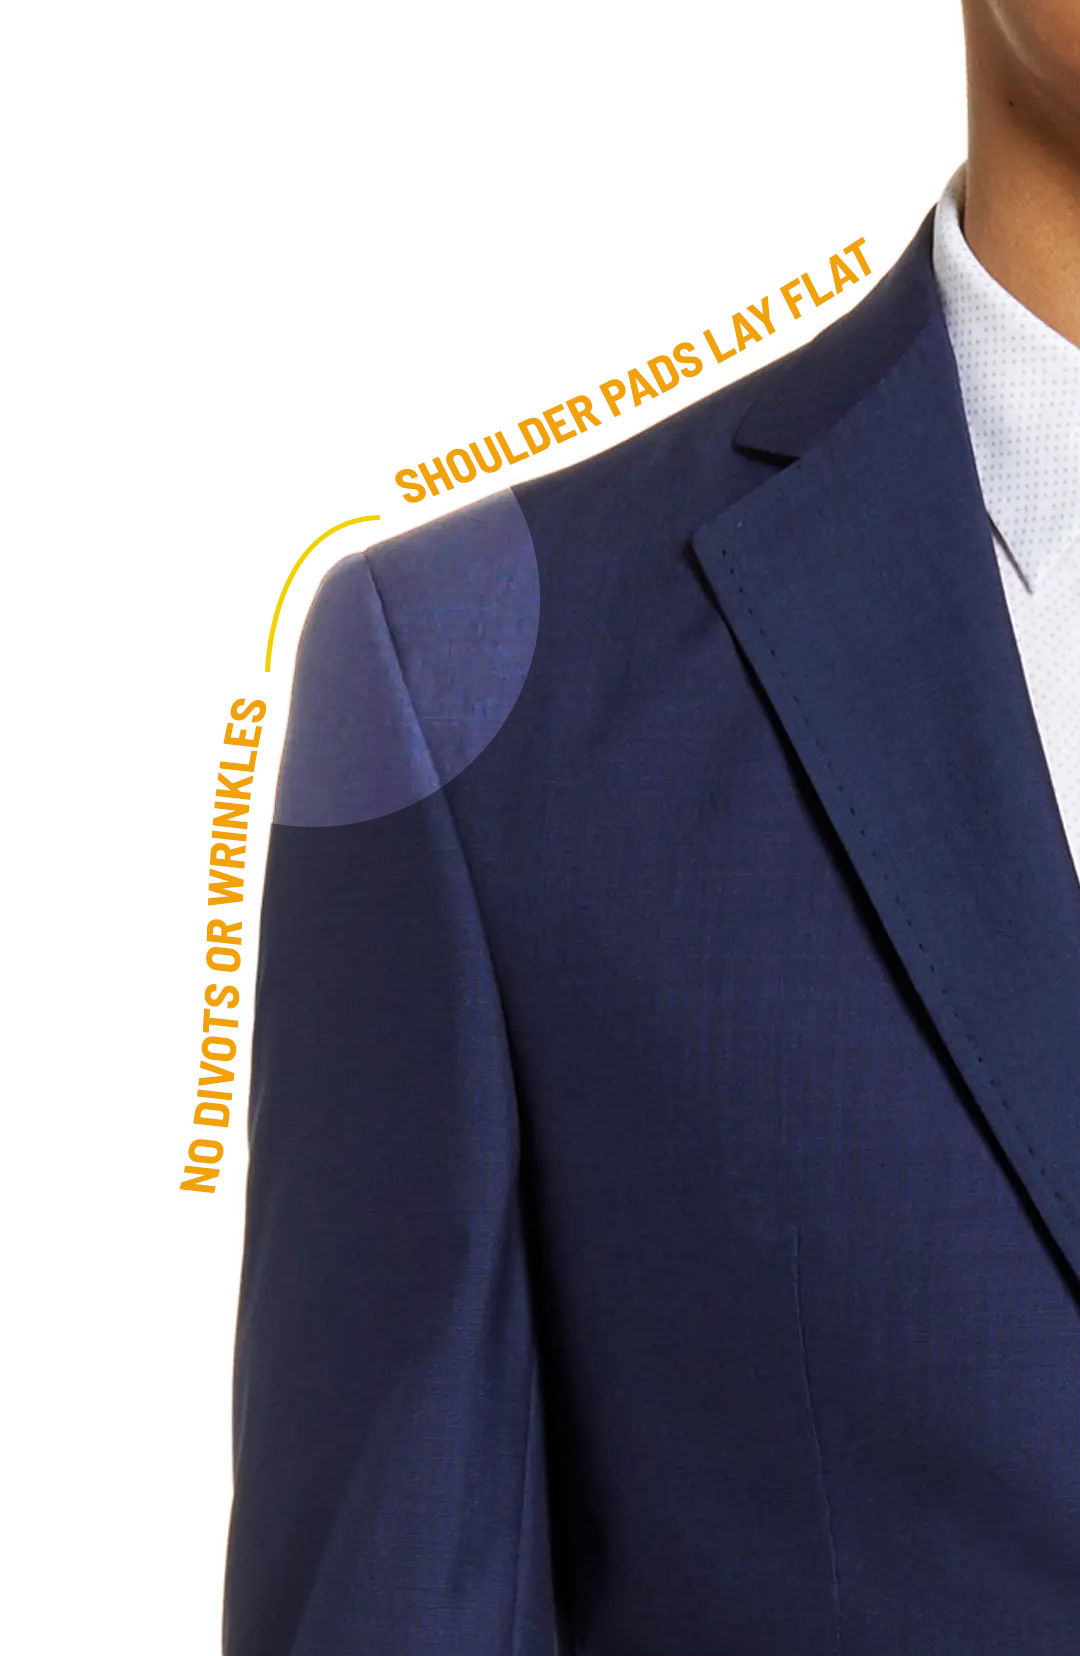 Fflat suit jacket shoulders with no divots or wrinkles